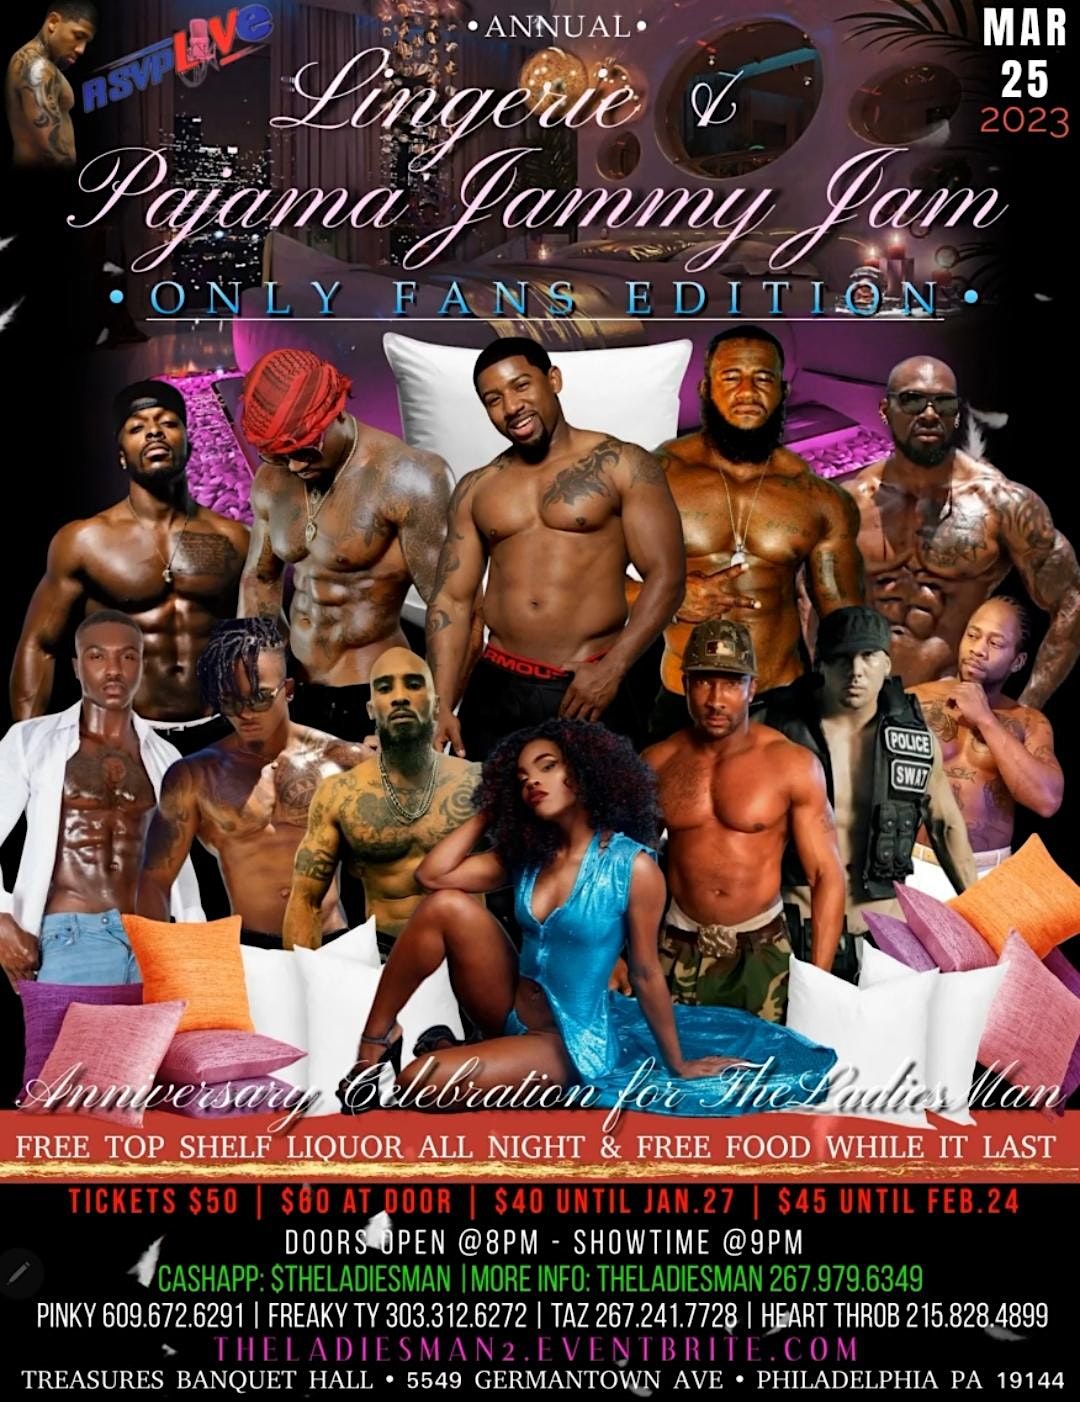 Rsvp live Presents  annual  ligerie and Pajama jammy jam   ONLYFANS EDITION